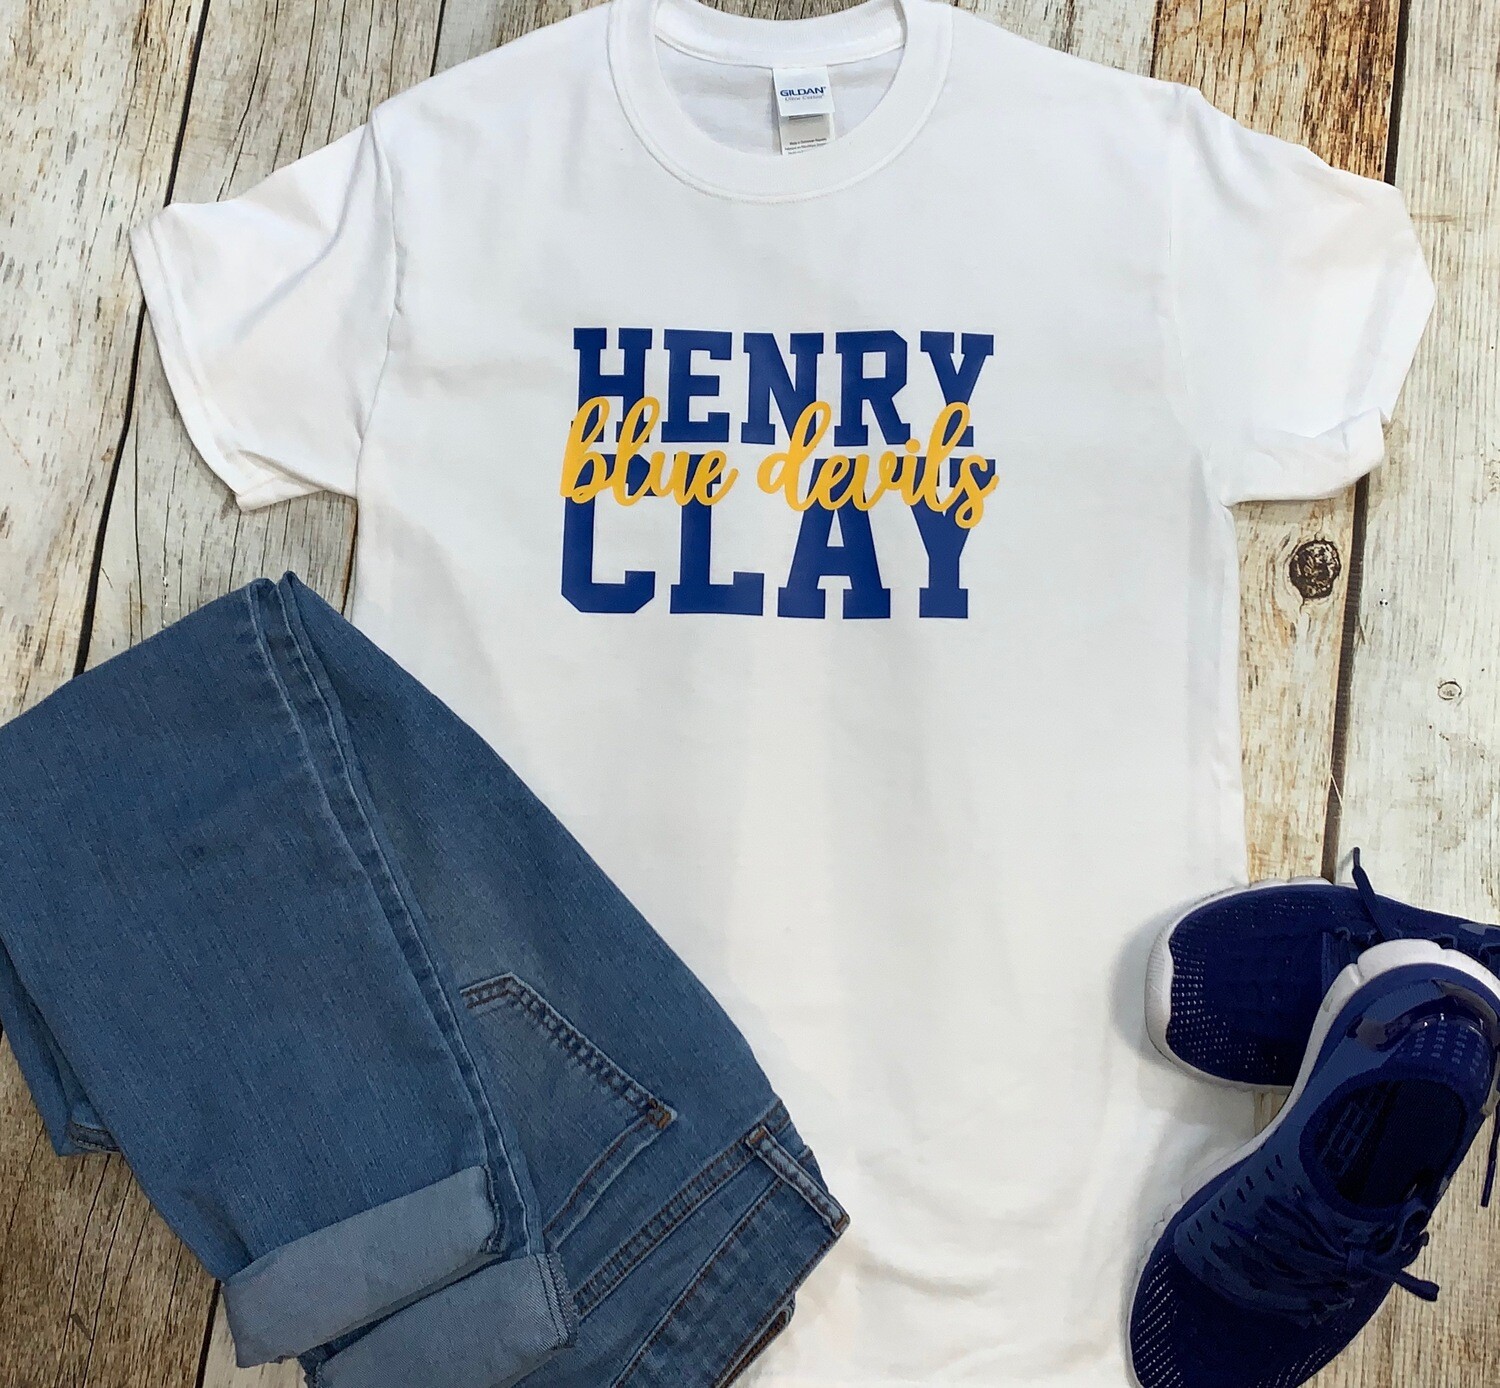 Henry Clay Blue Devils T-shirt - Short OR Long Sleeve